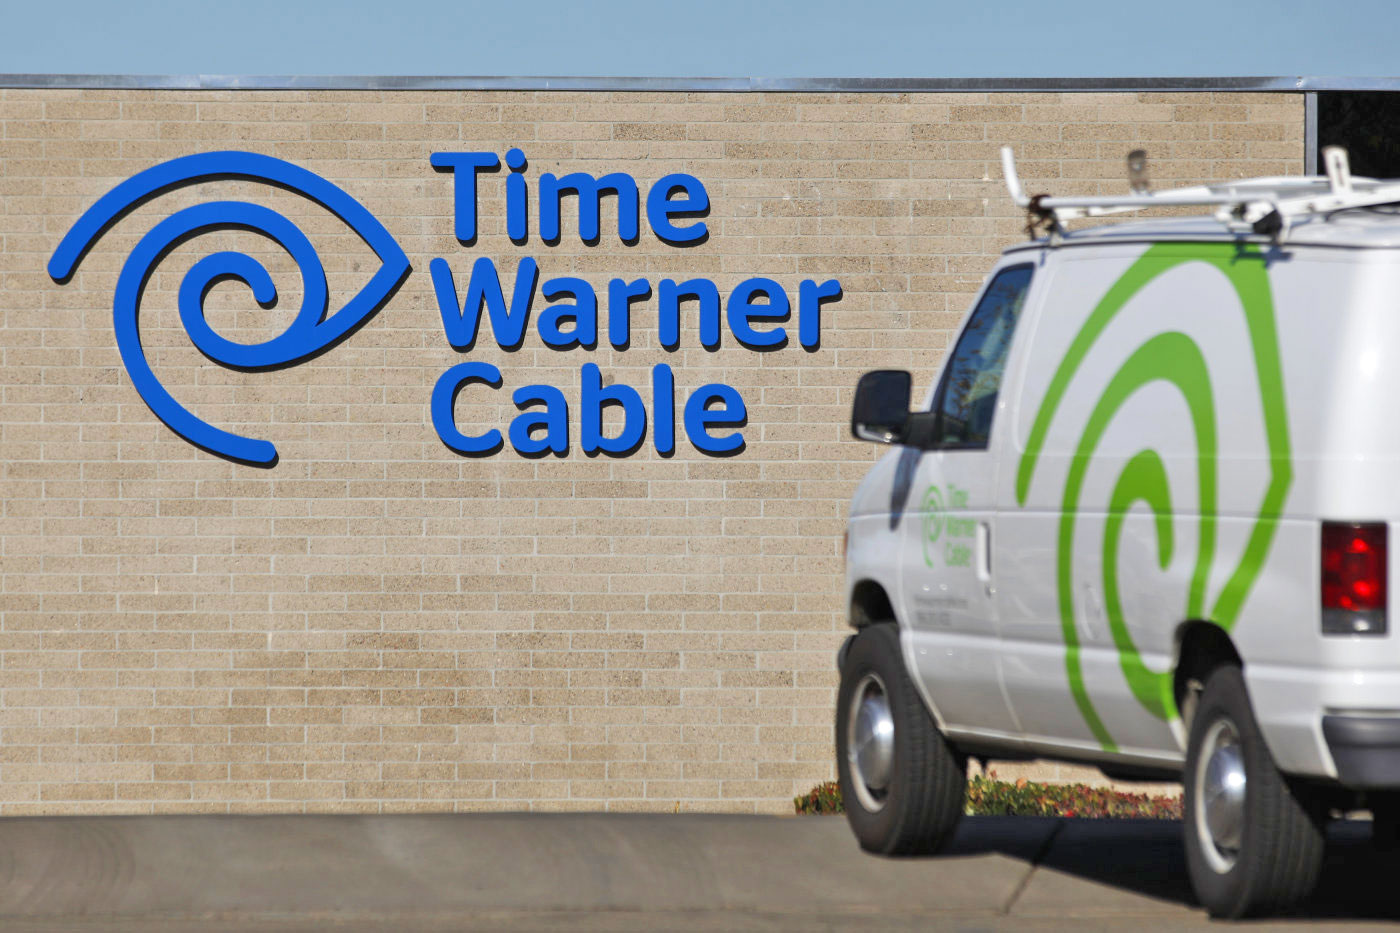 Charter will axe the Time Warner Cable brand